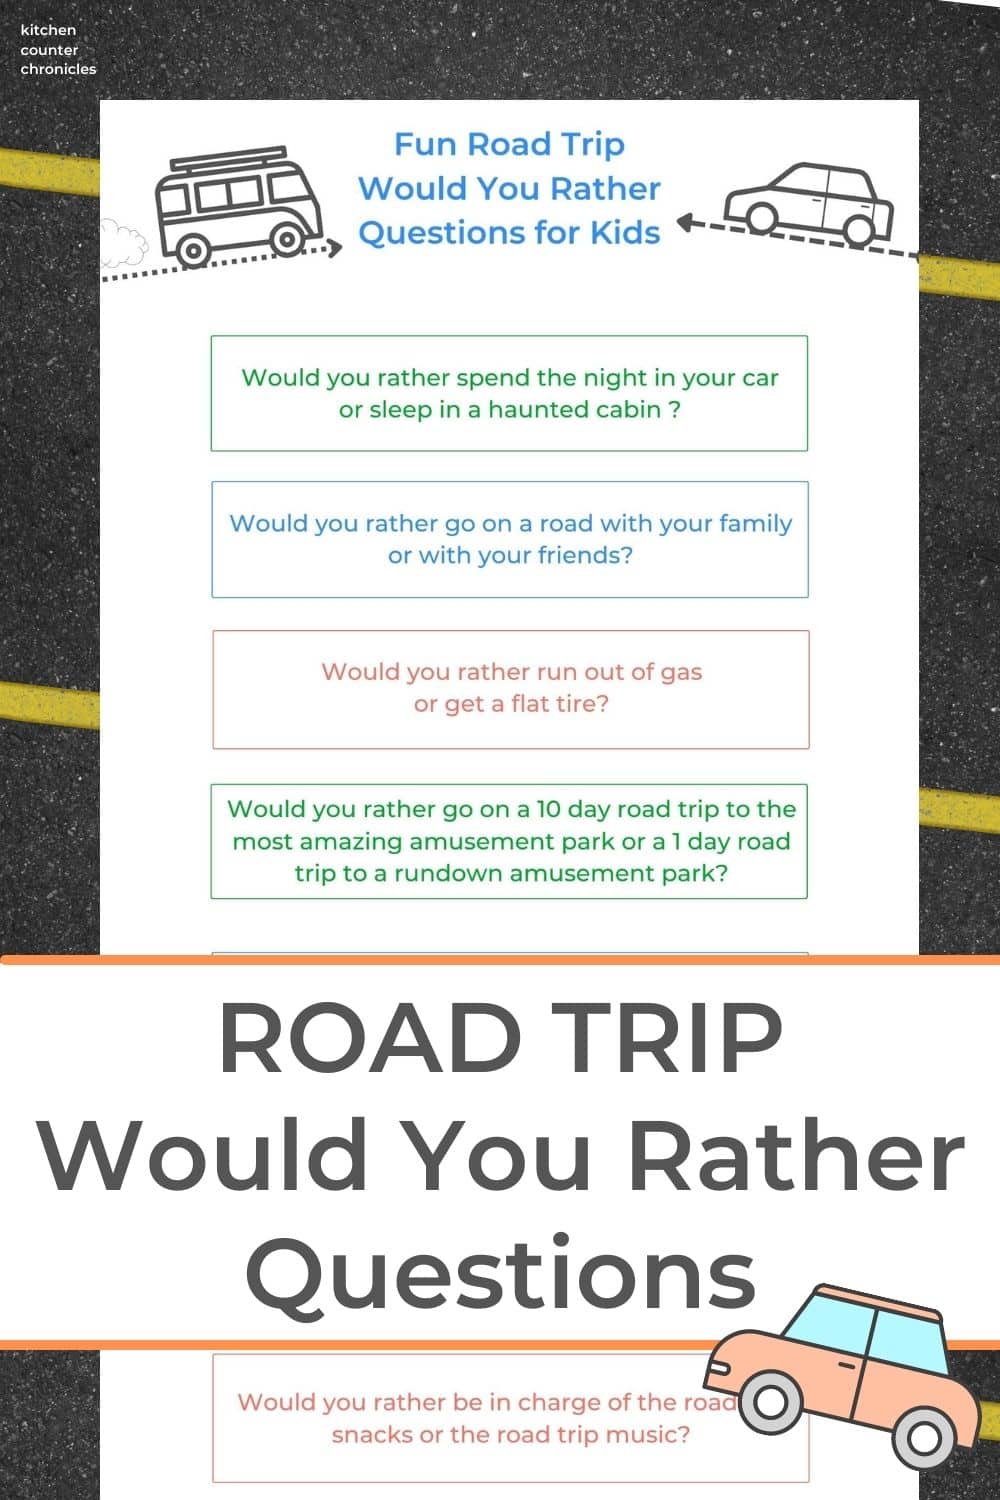 road trip would you rather questions for kids pin image with title and print out of questions